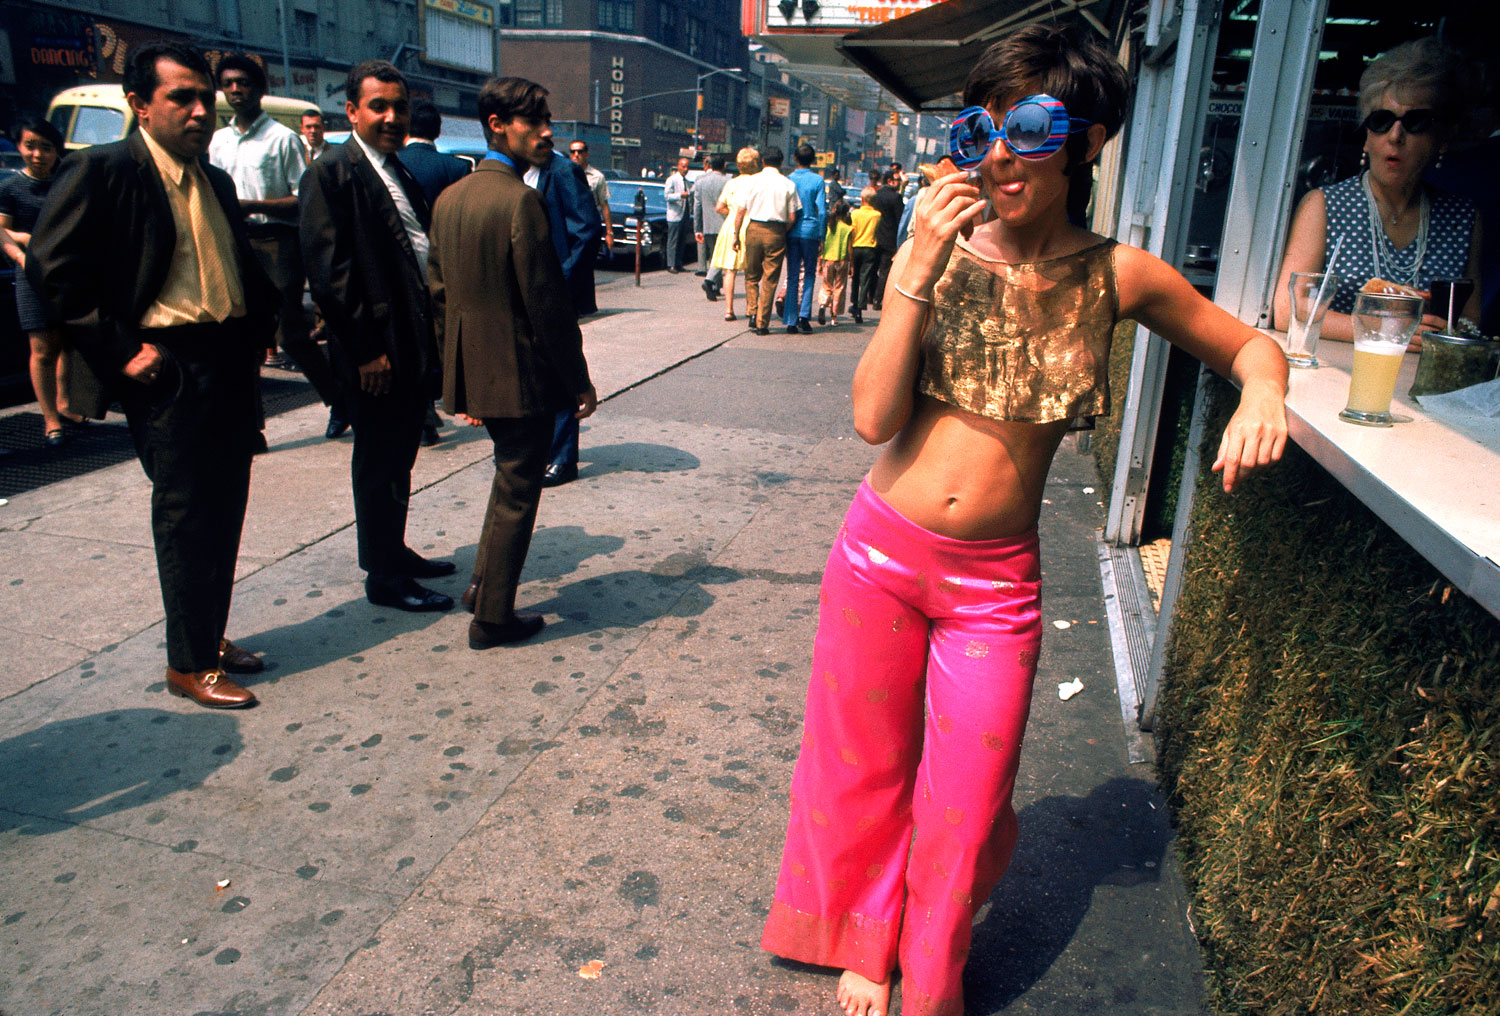 Men ogle a young woman wearing pink pants and a gold top, New York City, summer 1969.